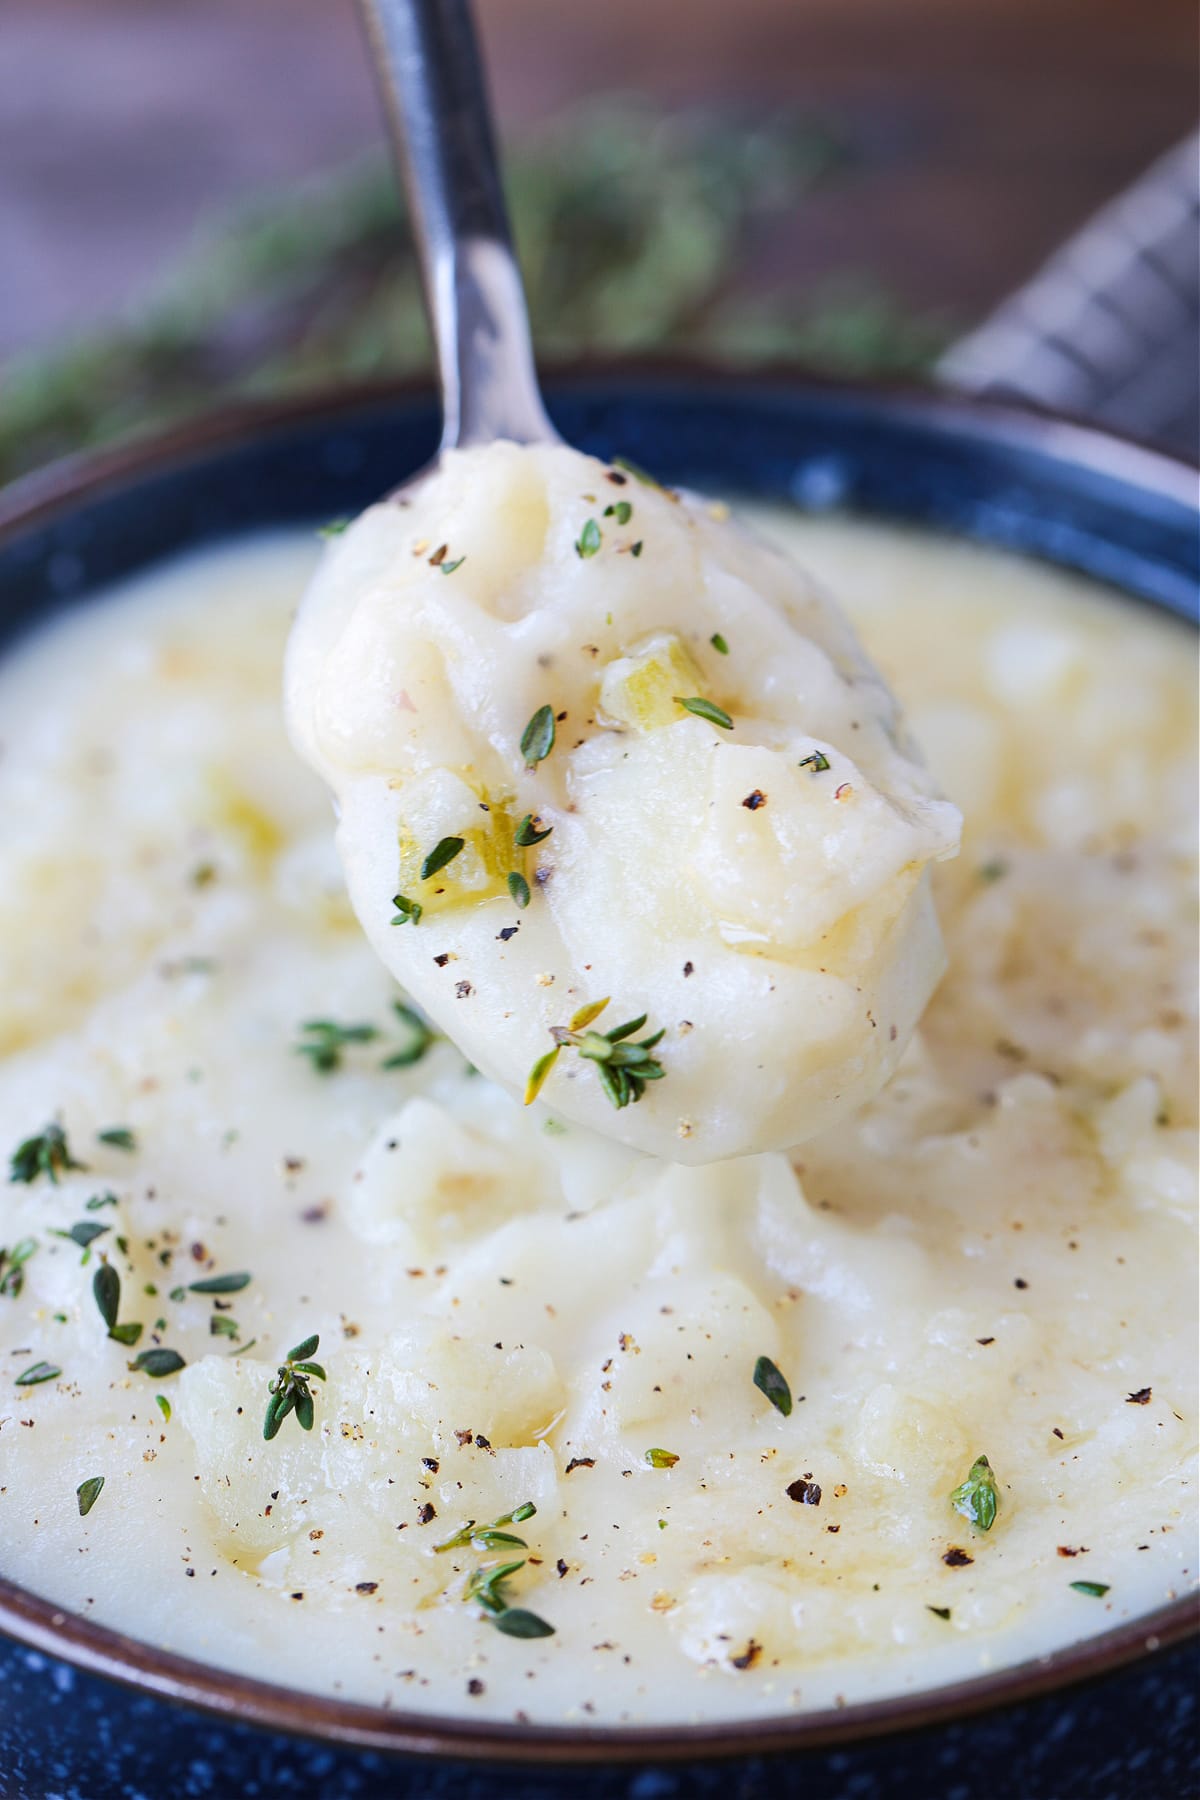 a spoonful of potato soup over a bowlThis Old Fashioned Potato Soup is so hearty, creamy and comforting. Easy to make with just a few ingredients, this comfort food soup recipe will warm you up on chilly days.